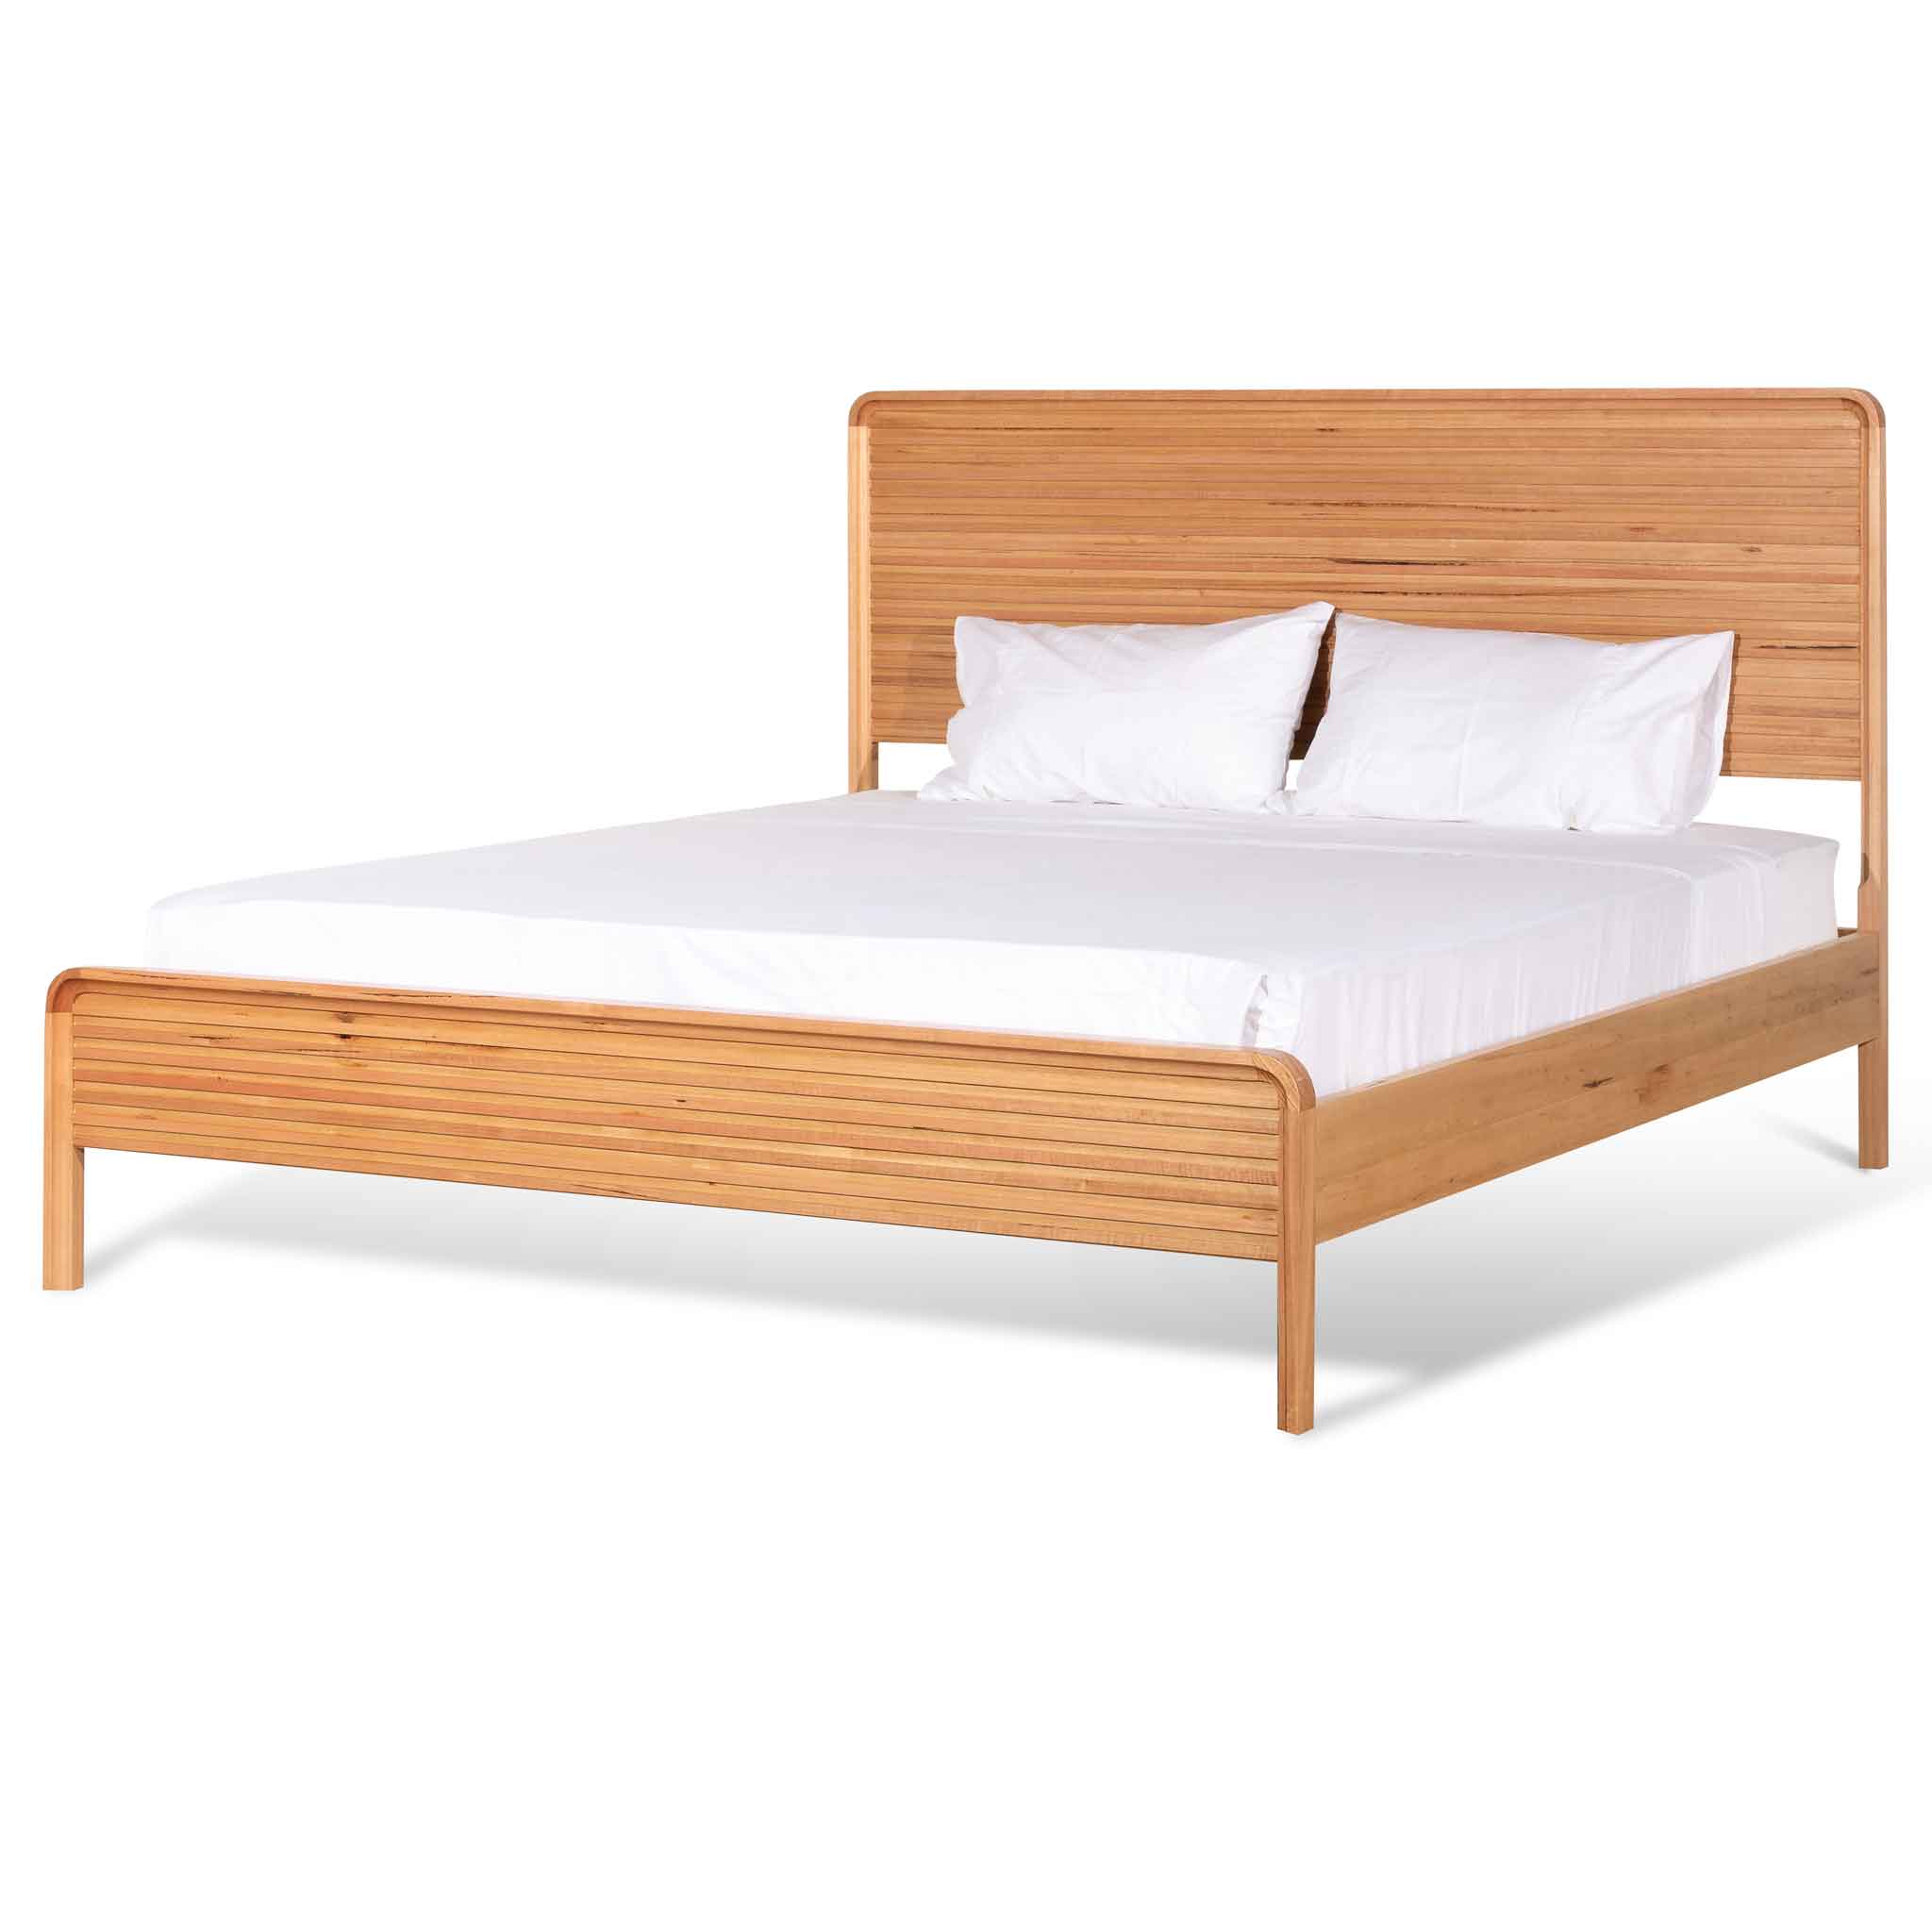 Archie Queen Bed Frame - Messmate - Beds